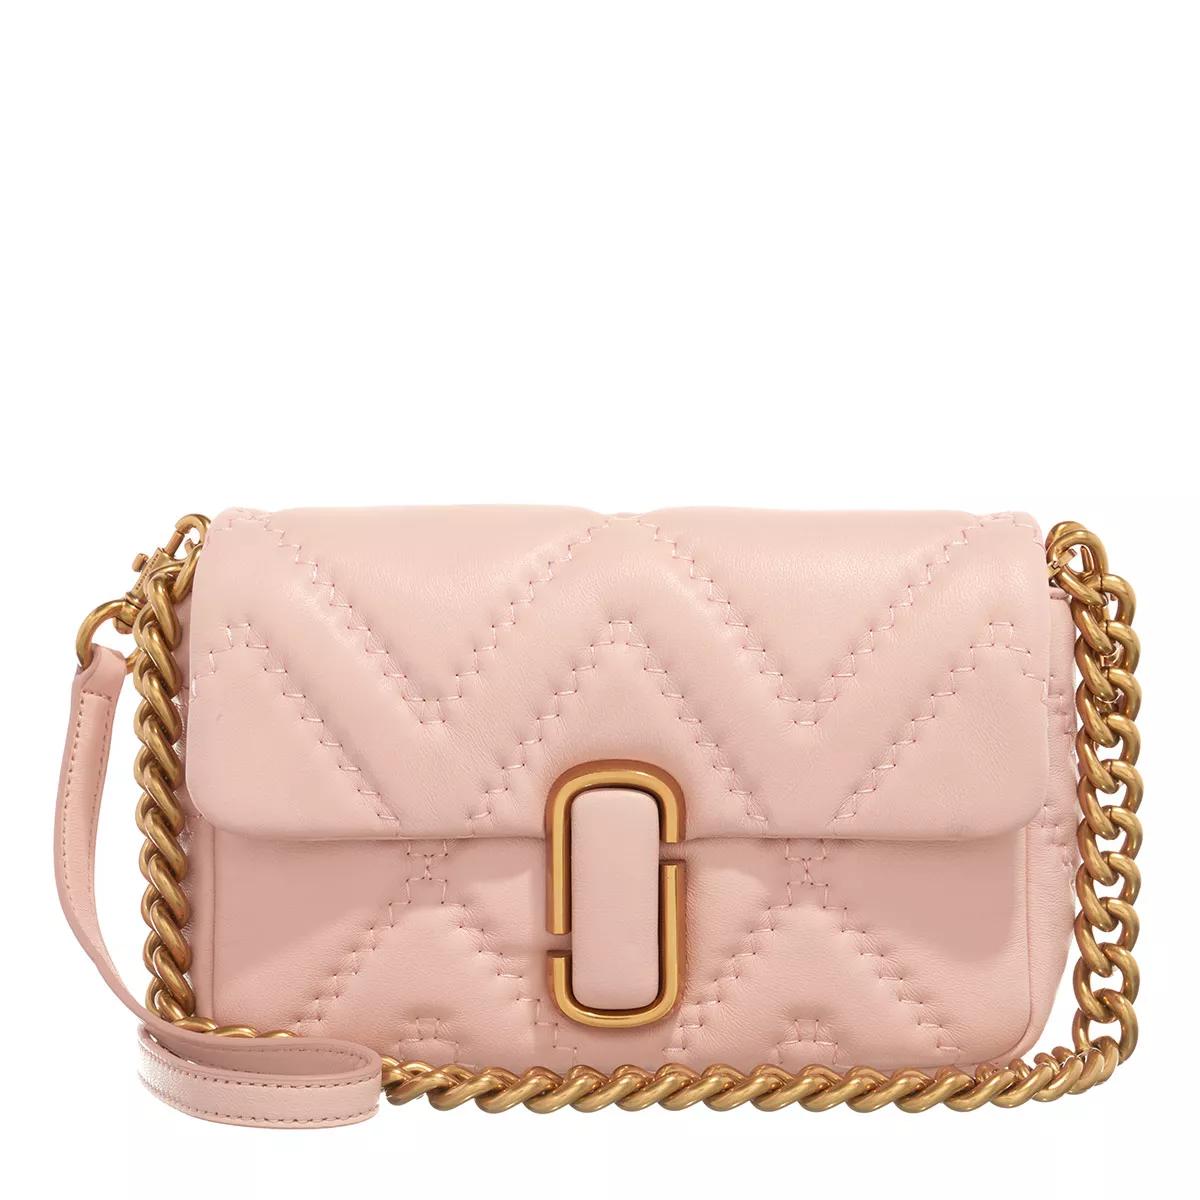 Marc Jacobs Pink Leather Crossbody Bag AUTHENTIC NWT